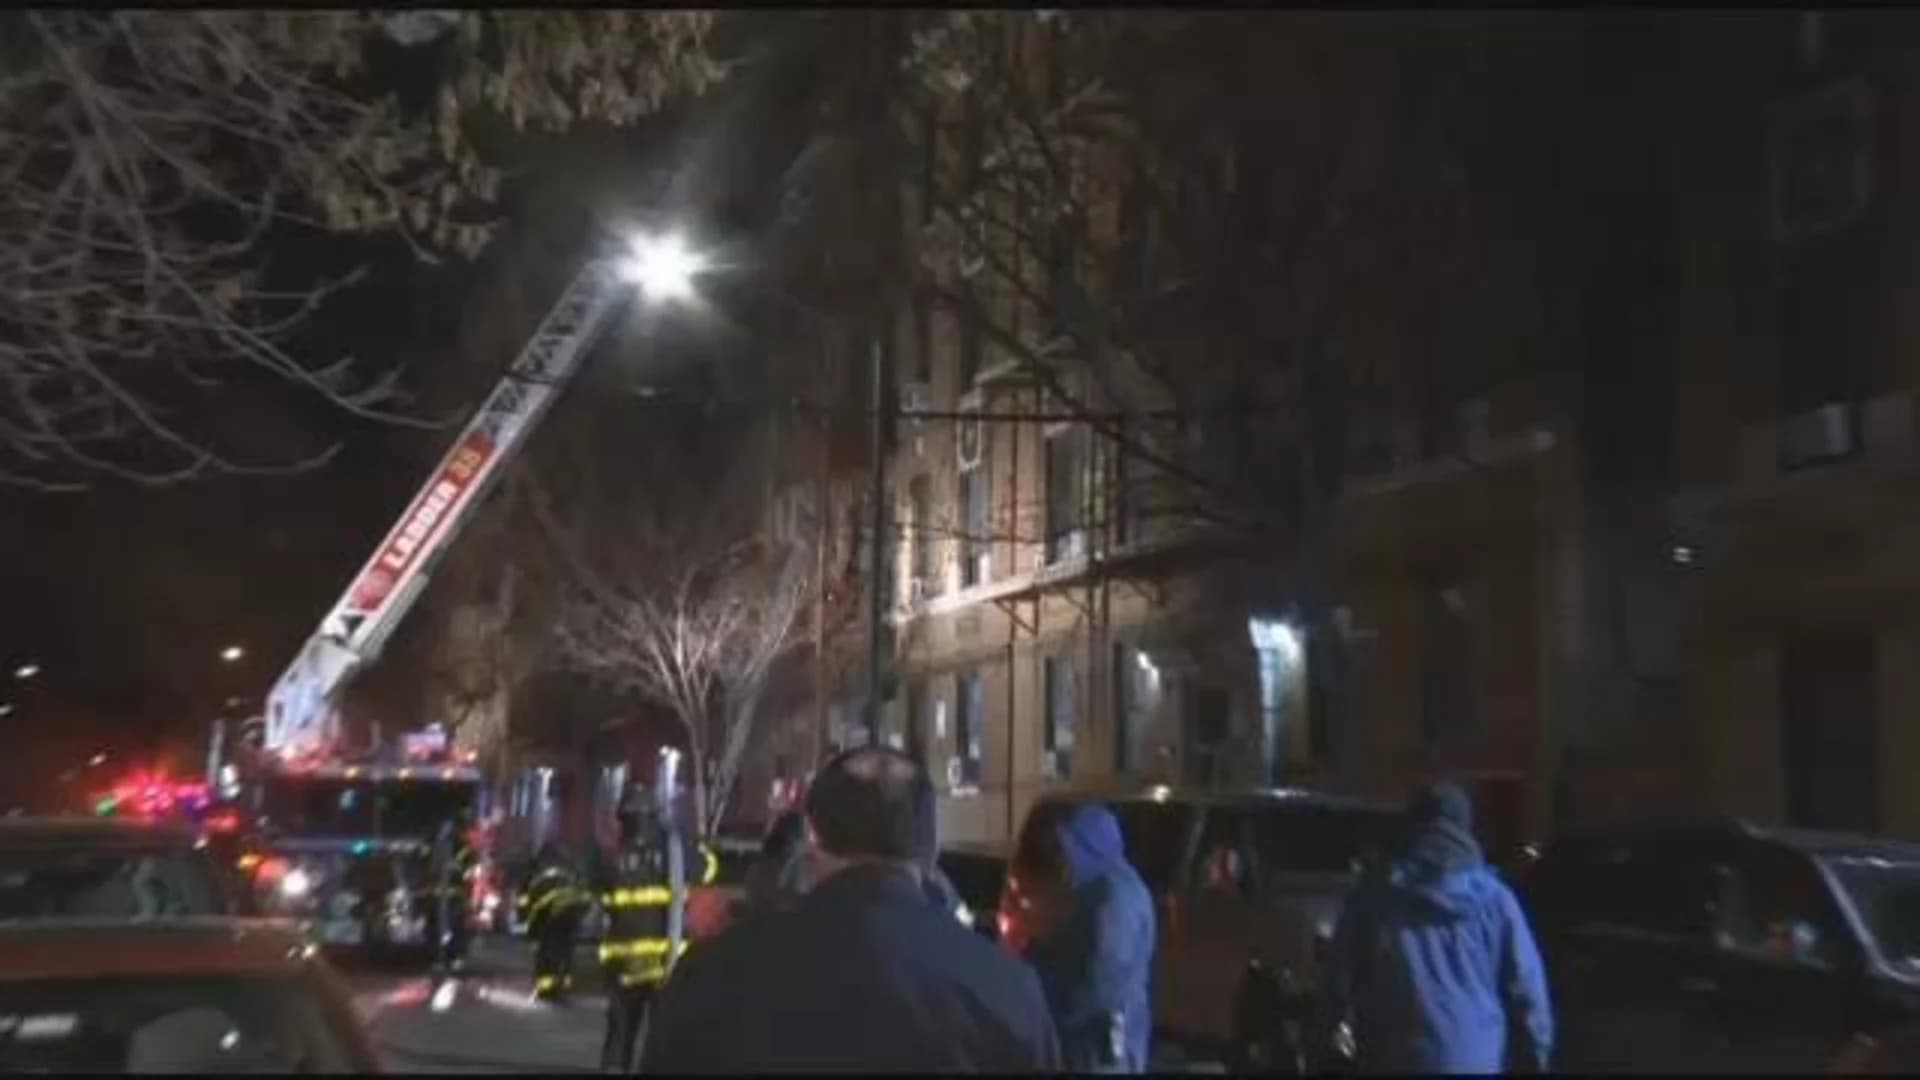 Mayor: 12 dead in apartment building fire, including a baby